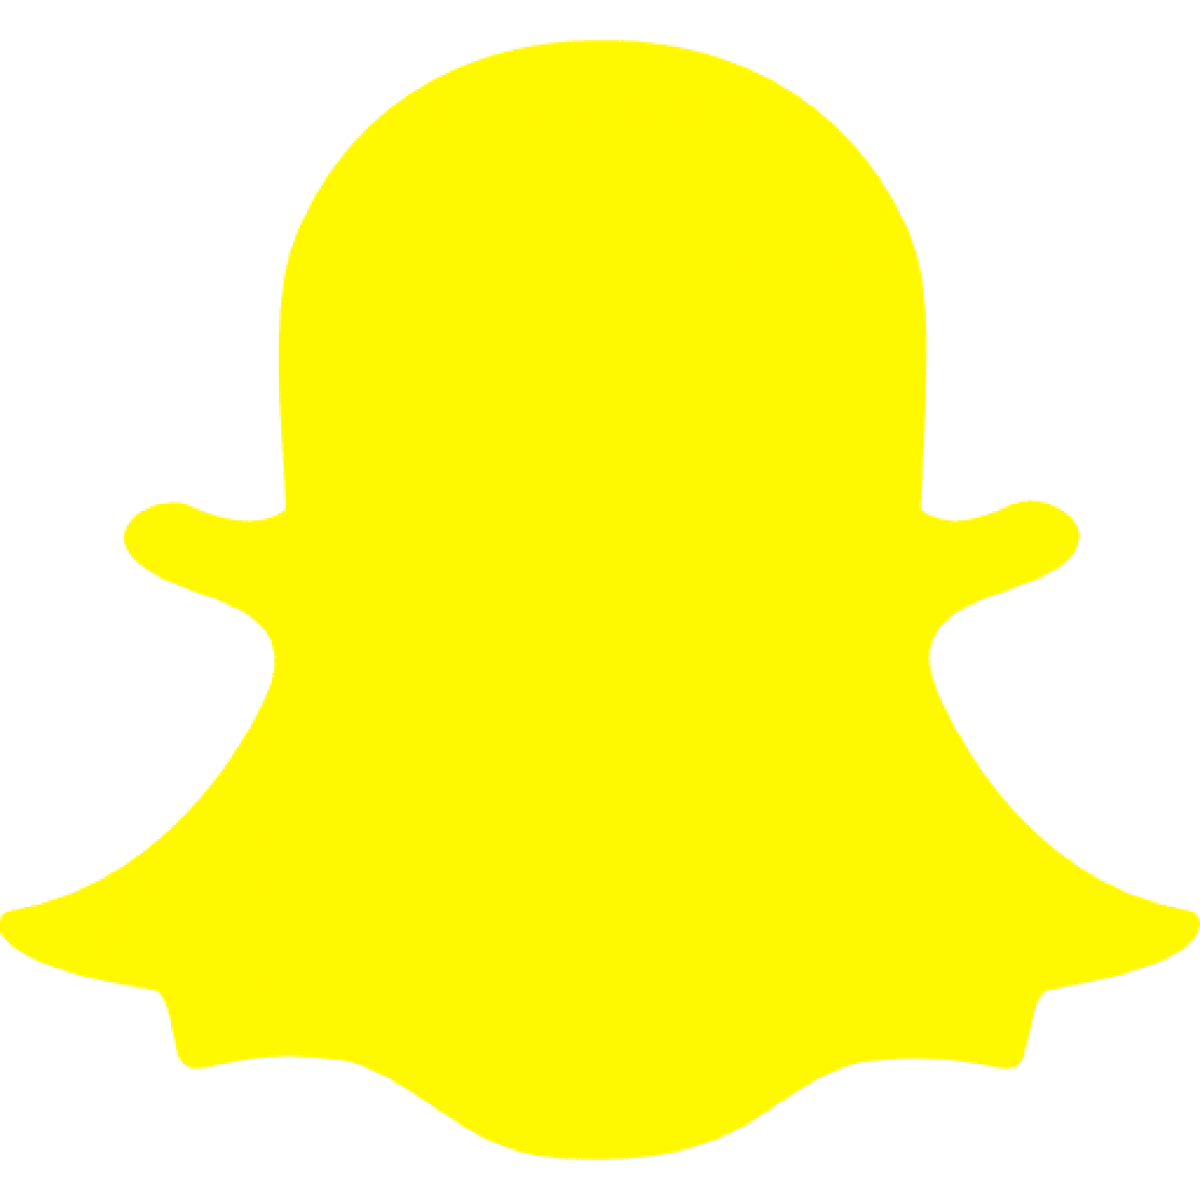 Buy Real Snapchat Followers Promote Your Account